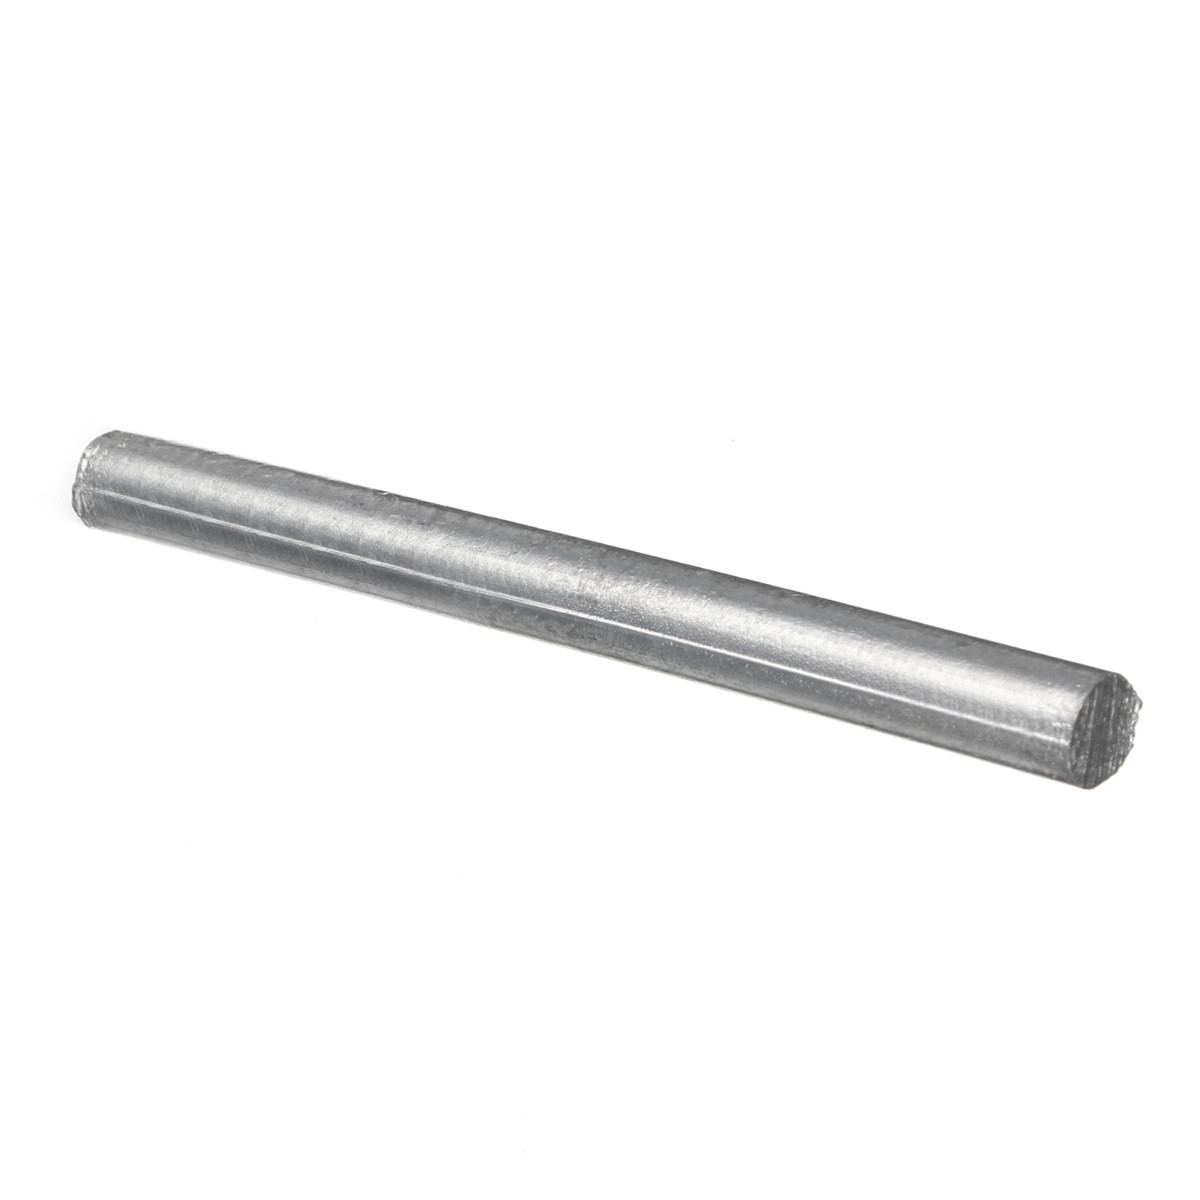 2mm 6mm Pure Nickel Ni Rod Zinc Zn Bar Solid Round Metal Shaft Anode 100/300mm 